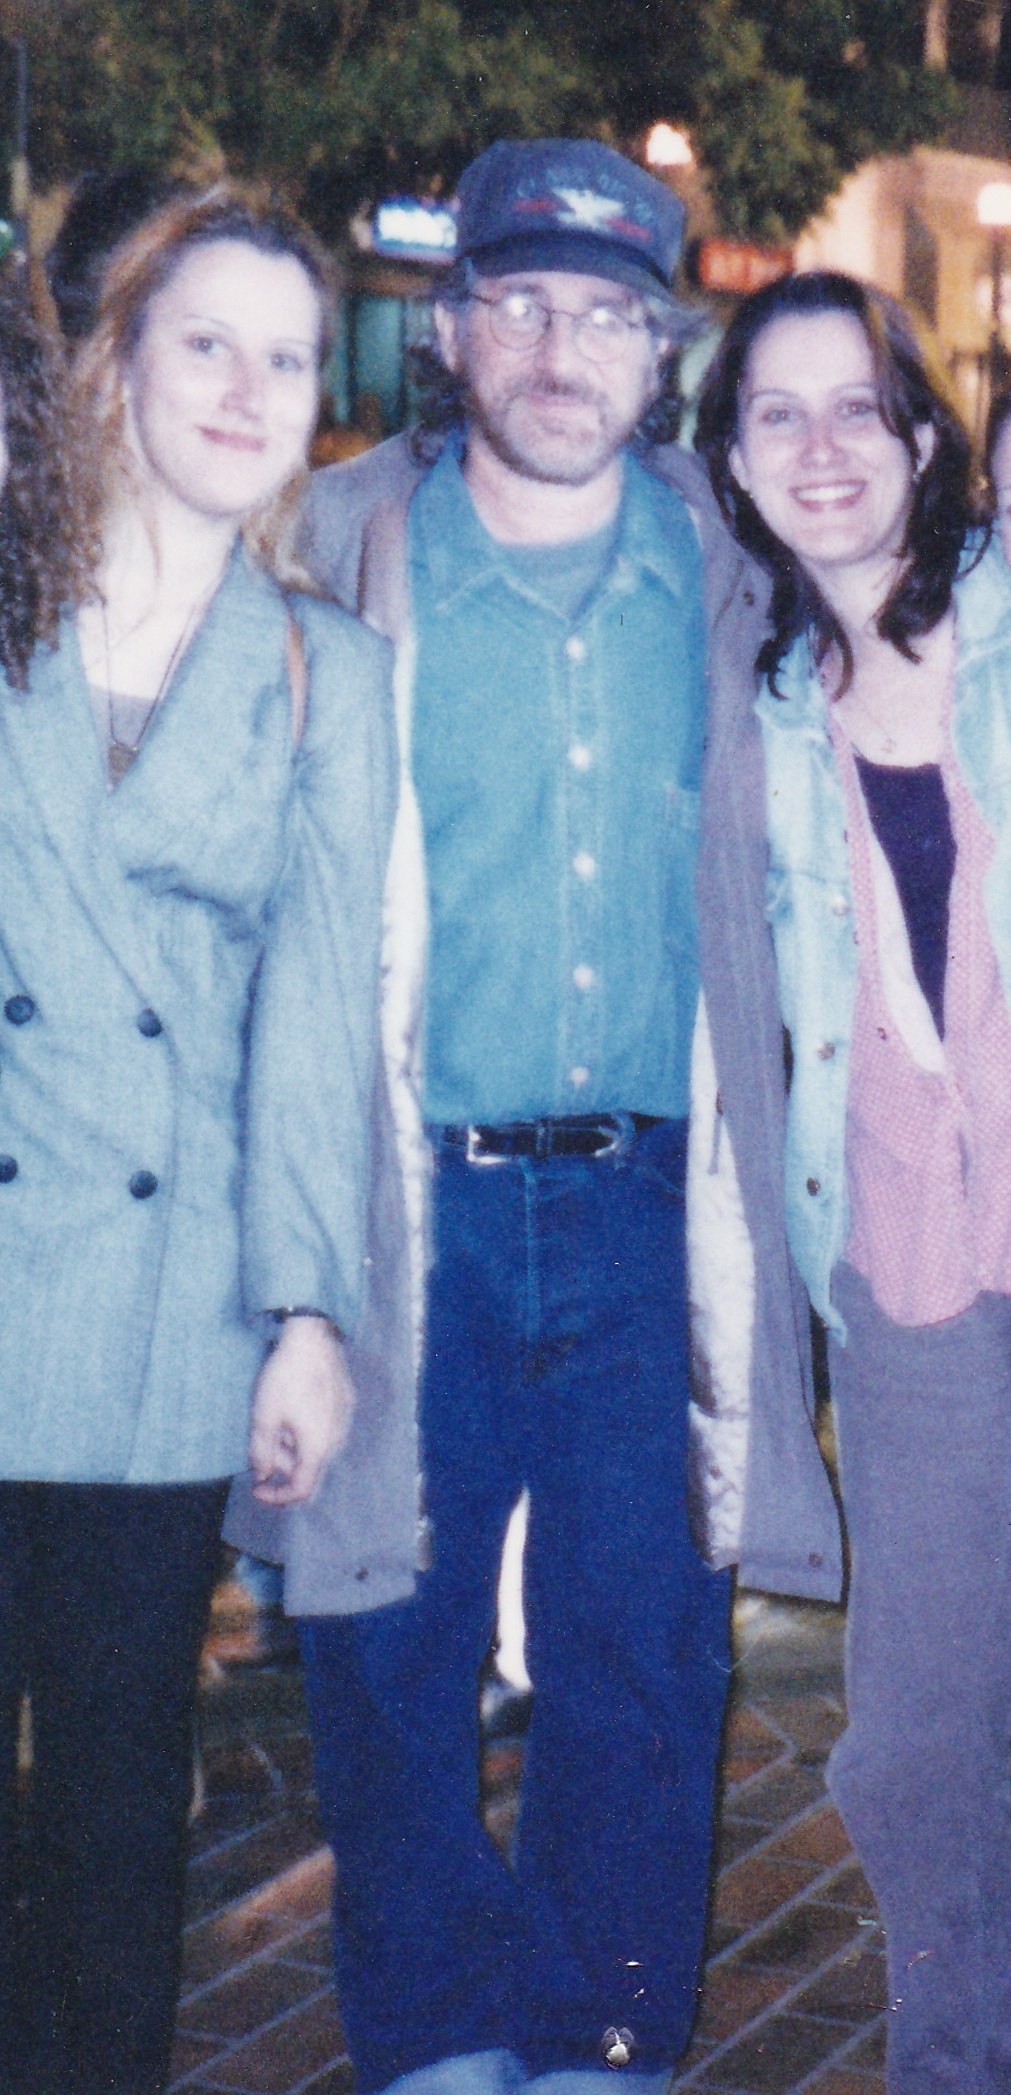 Director Steven Spielberg with Jitka and Katerina Bartu